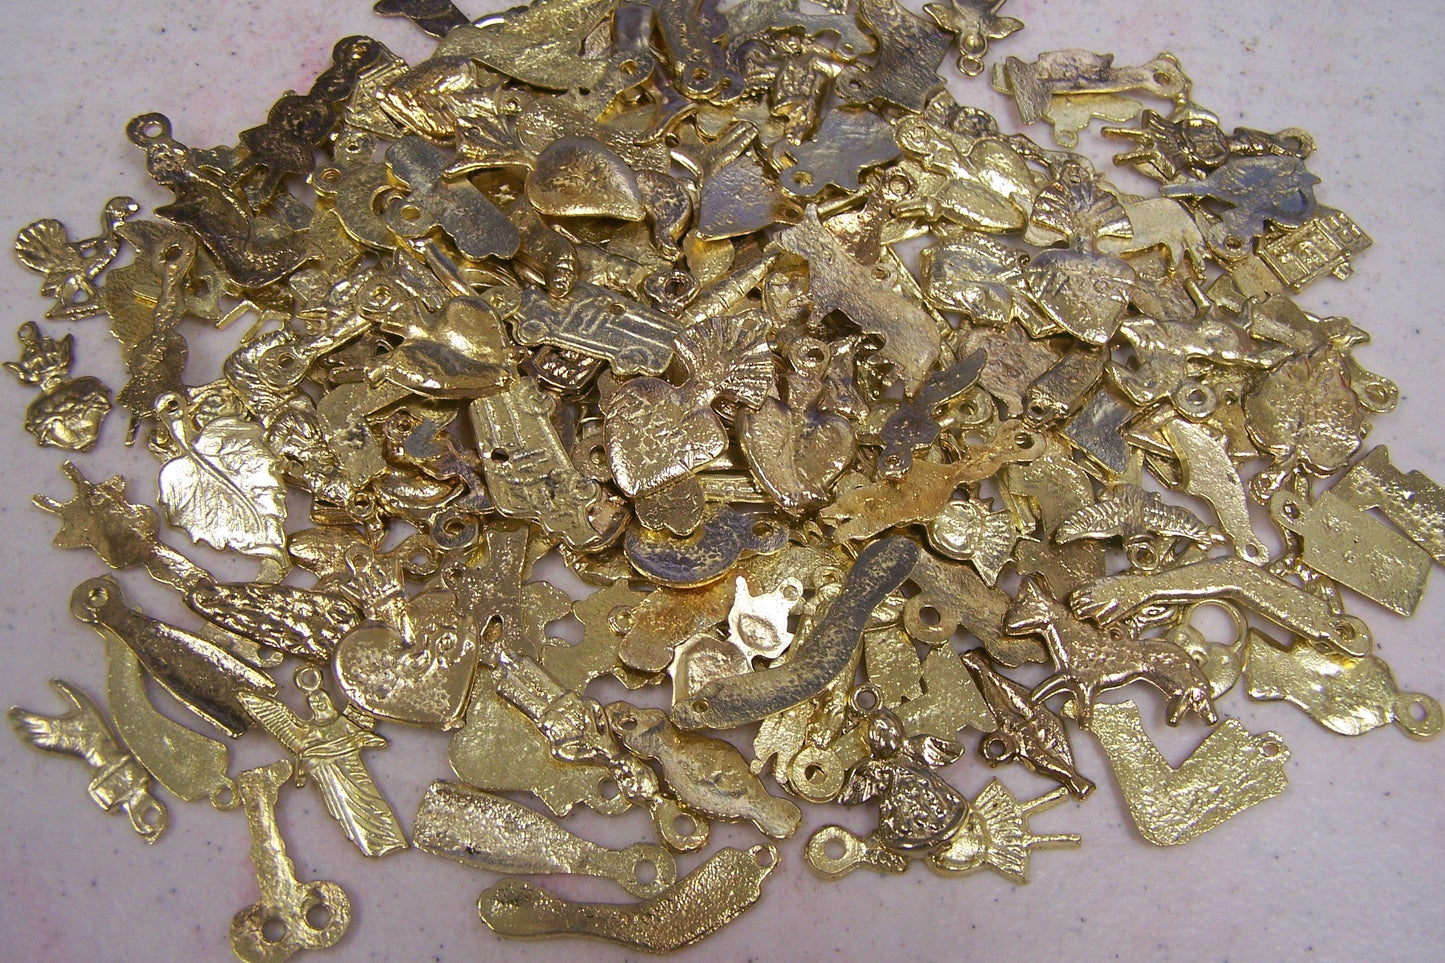 Lot of 50 Assorted Shiny Golden-Colored Milagros, Mexico